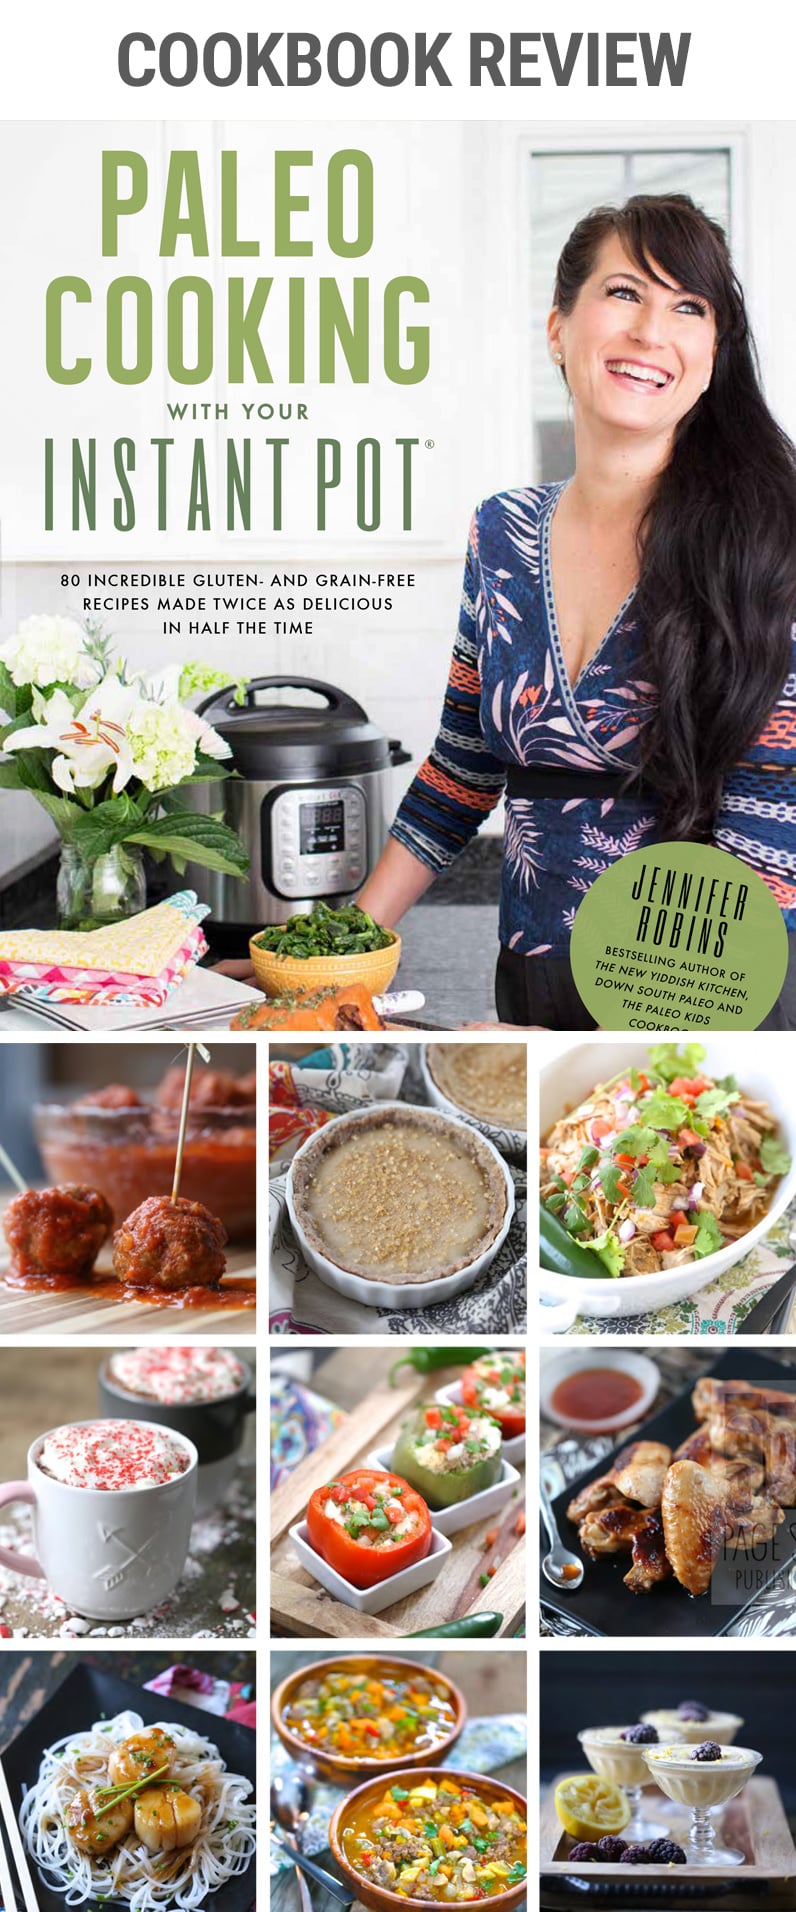 Paleo Cooking With Your Instant Pot - Cookbook Review